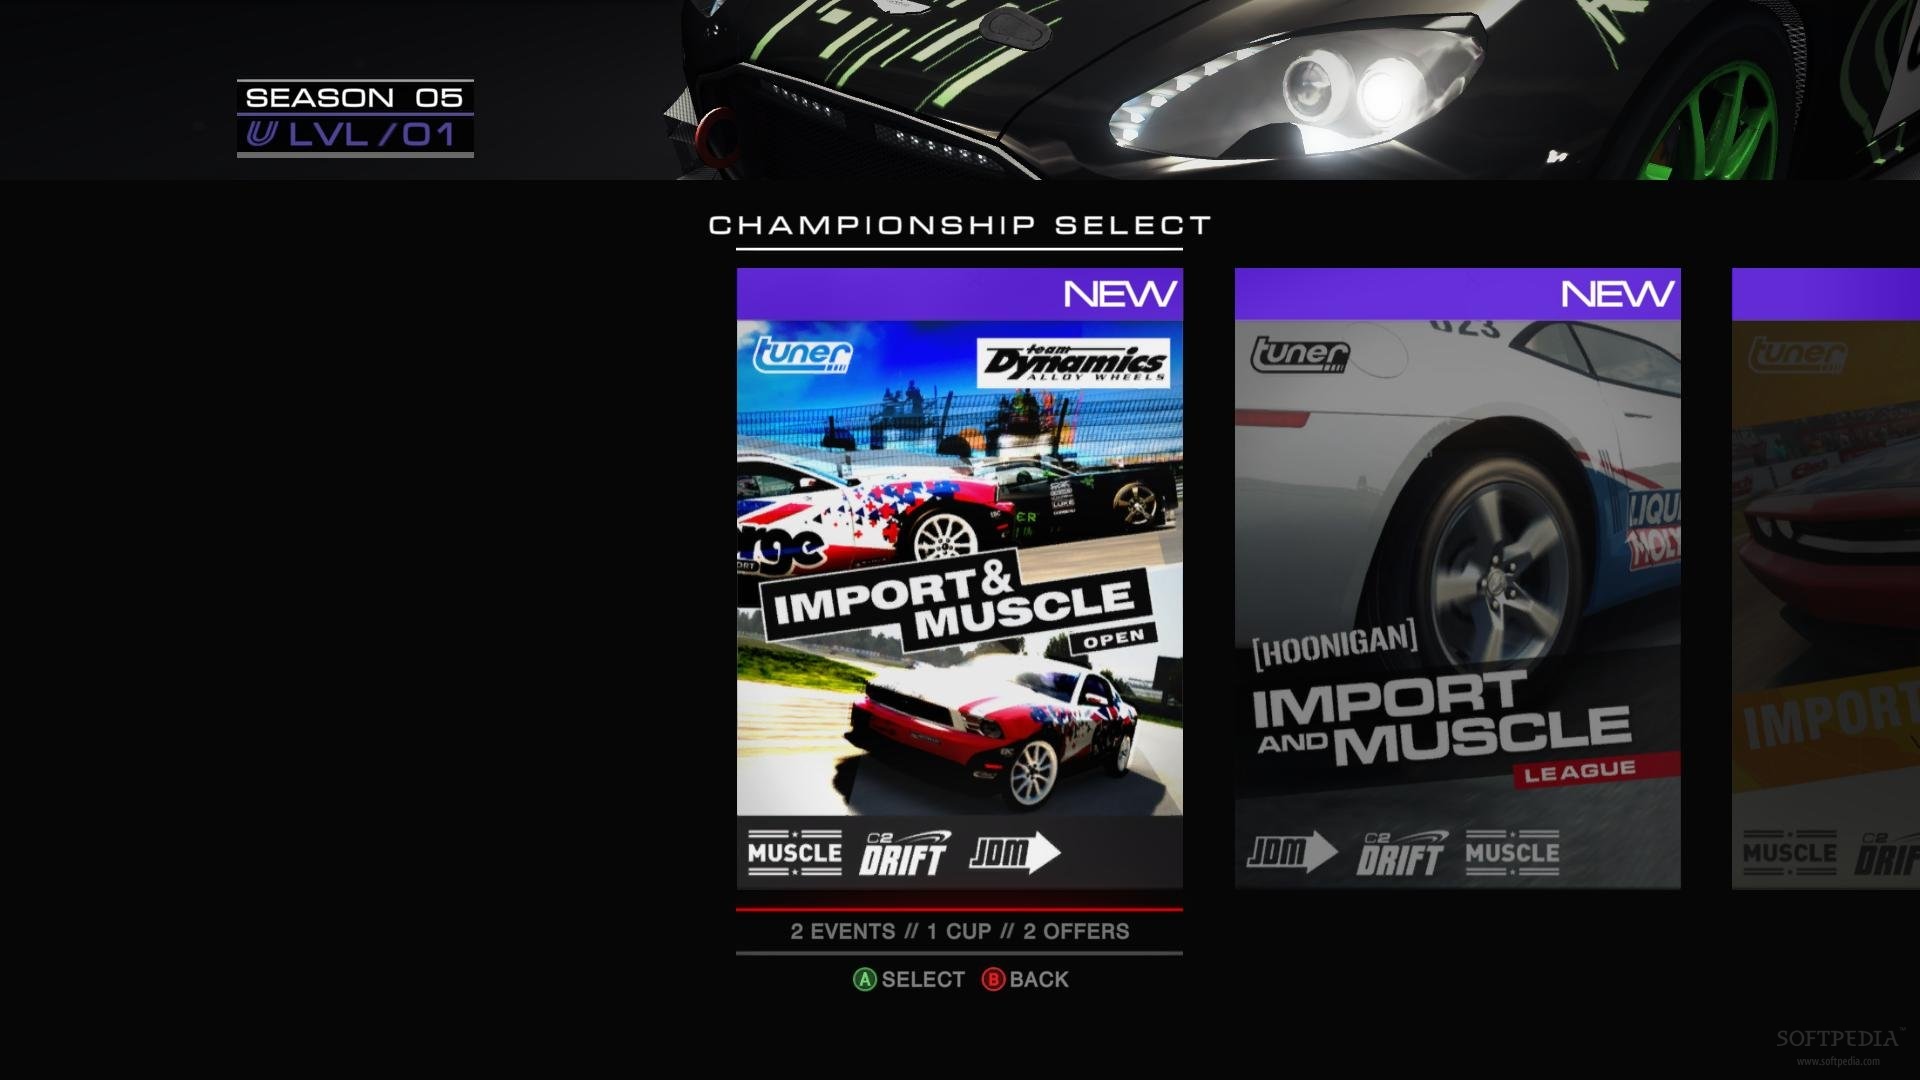 GRID Autosport system requirements